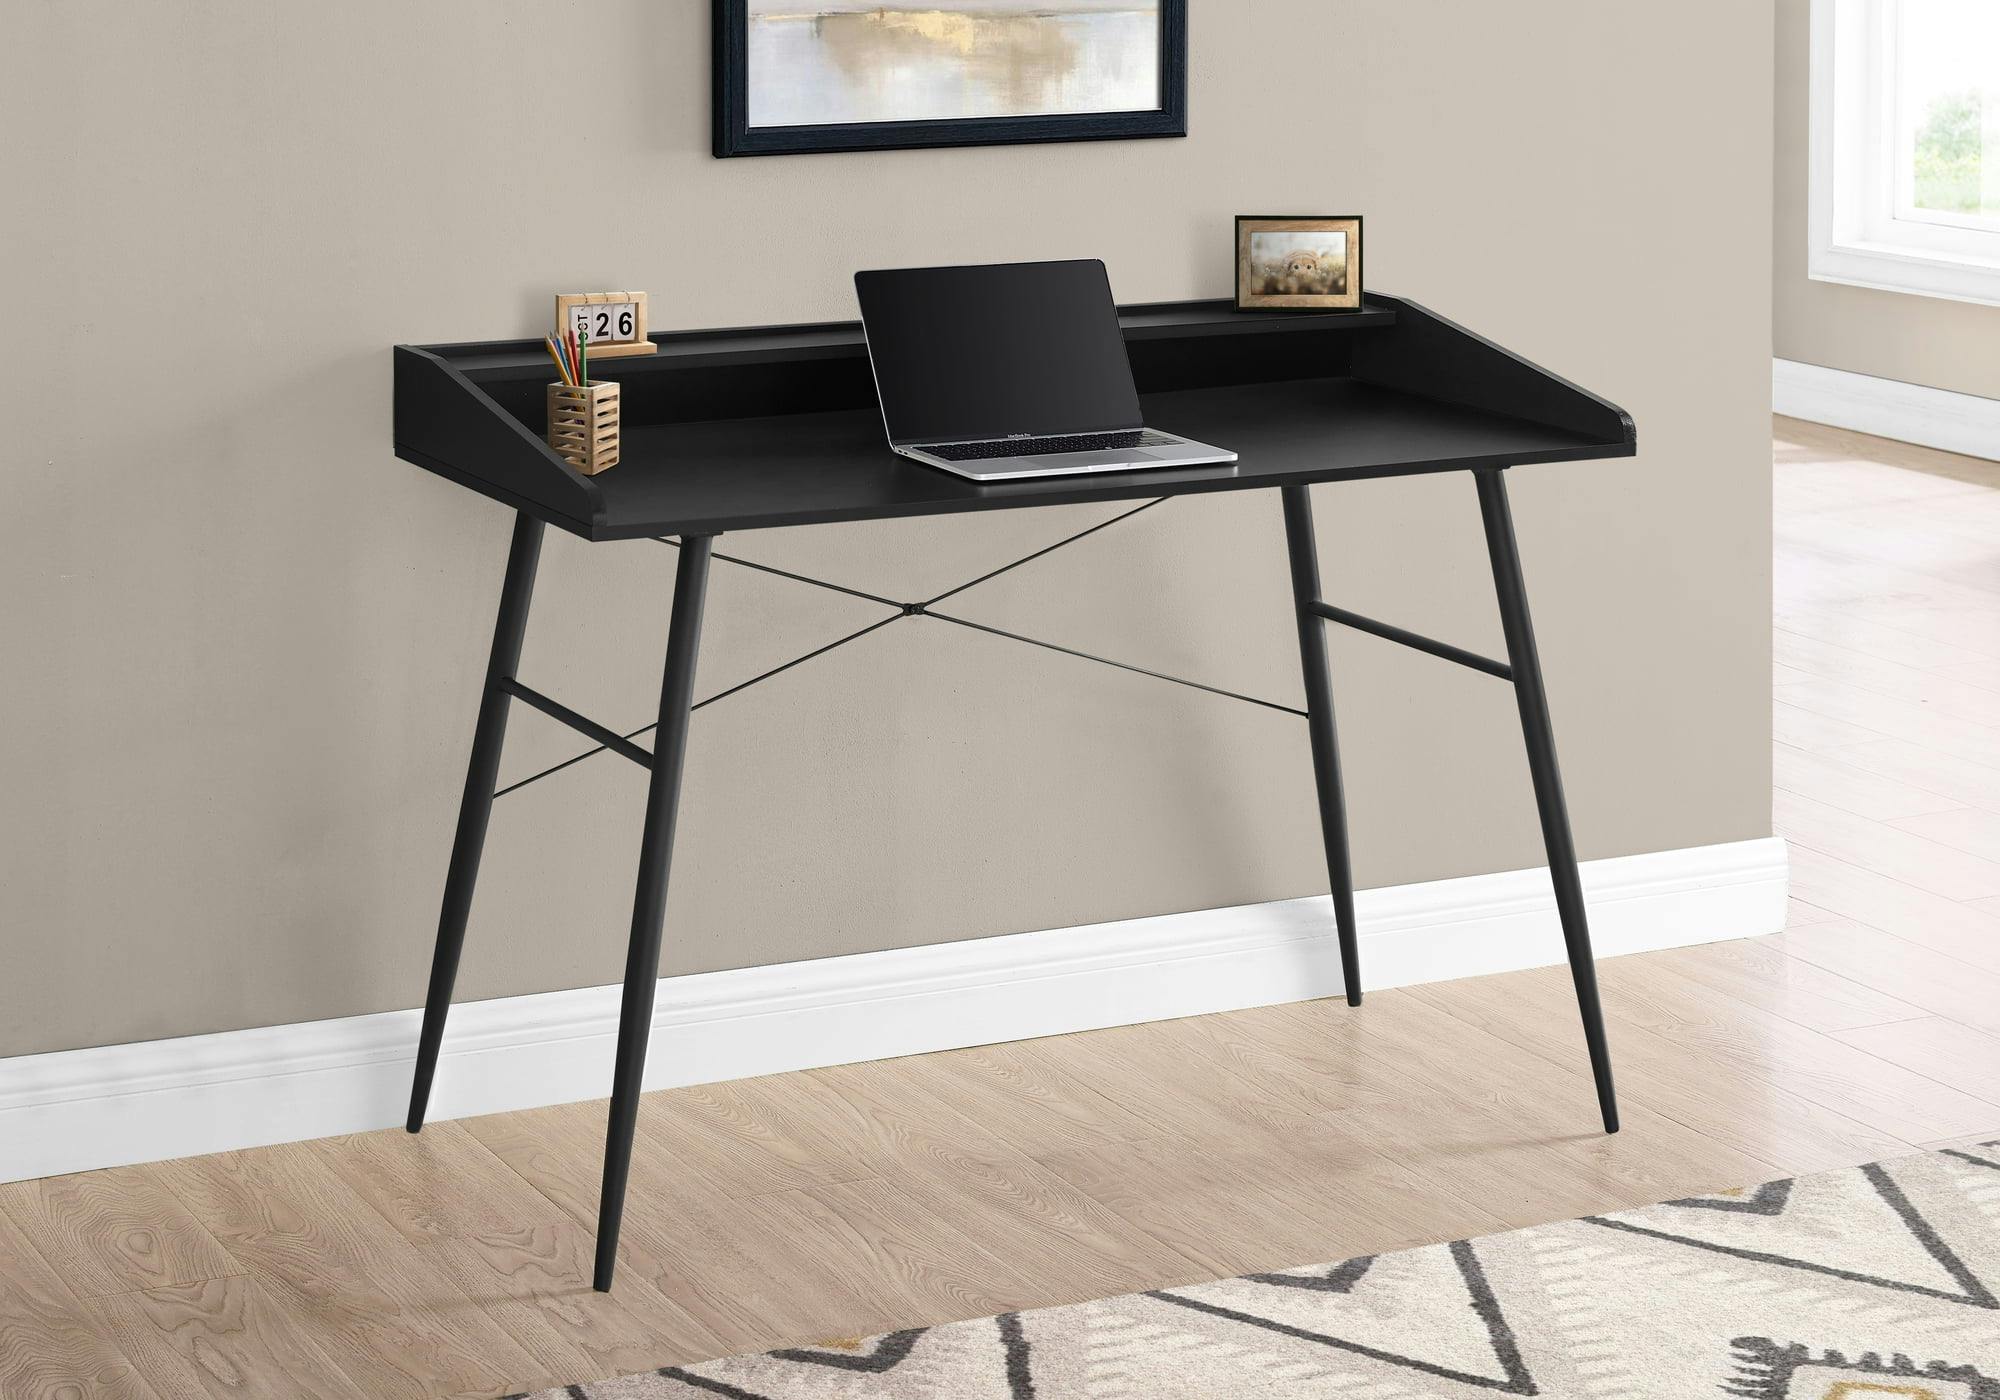 Sleek Black Wood Writing Desk with Hutch and Metal Accents